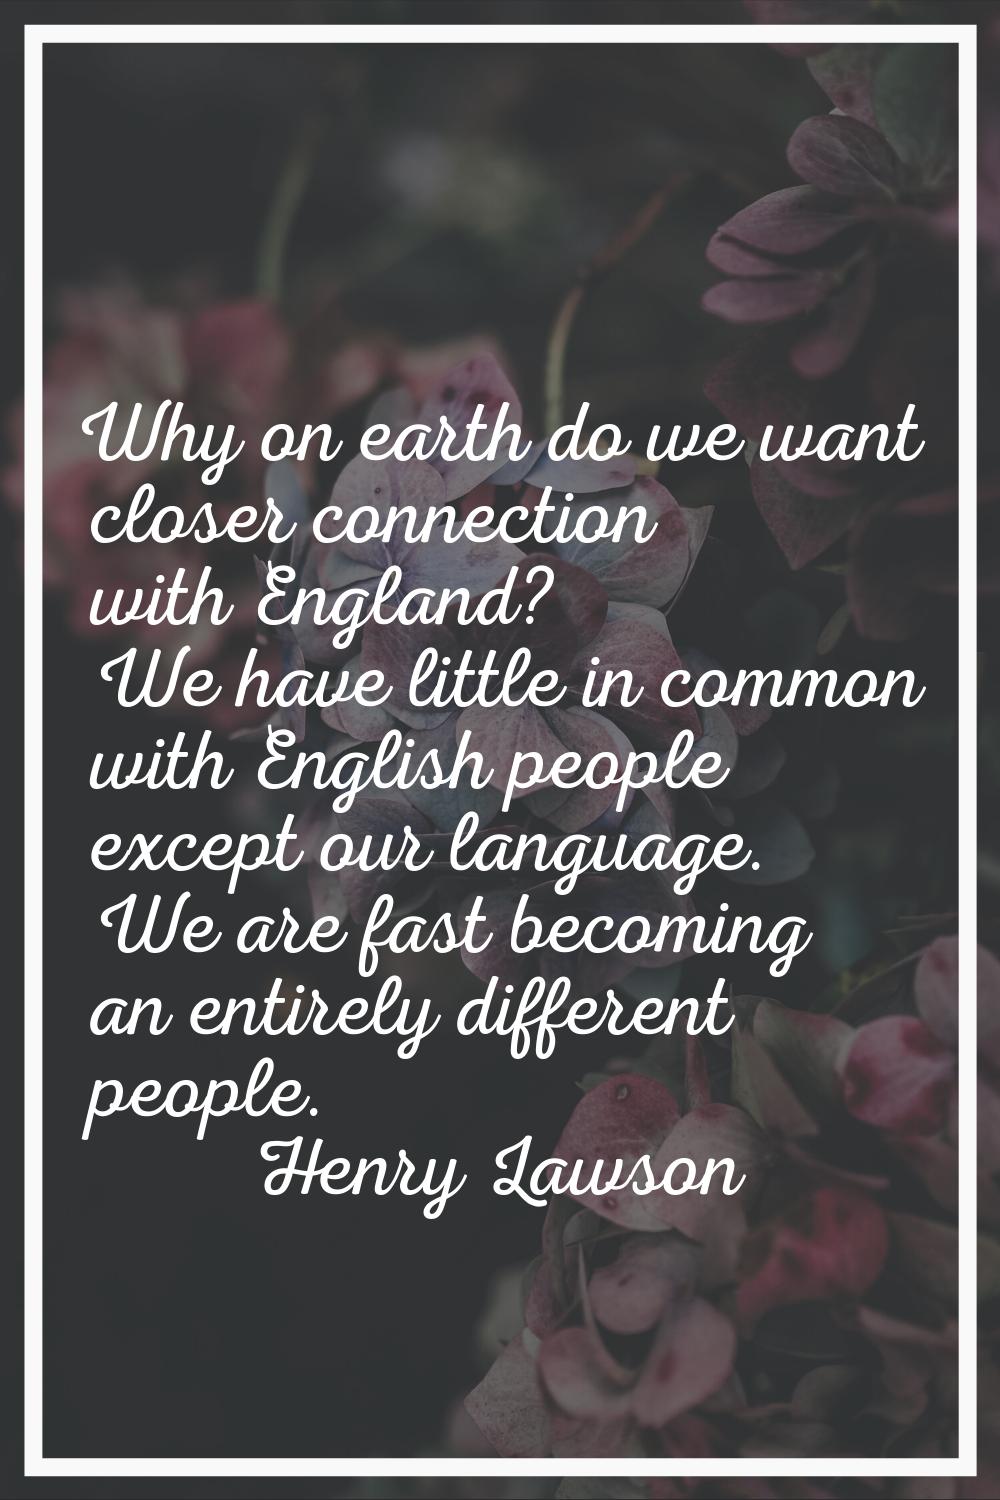 Why on earth do we want closer connection with England? We have little in common with English peopl